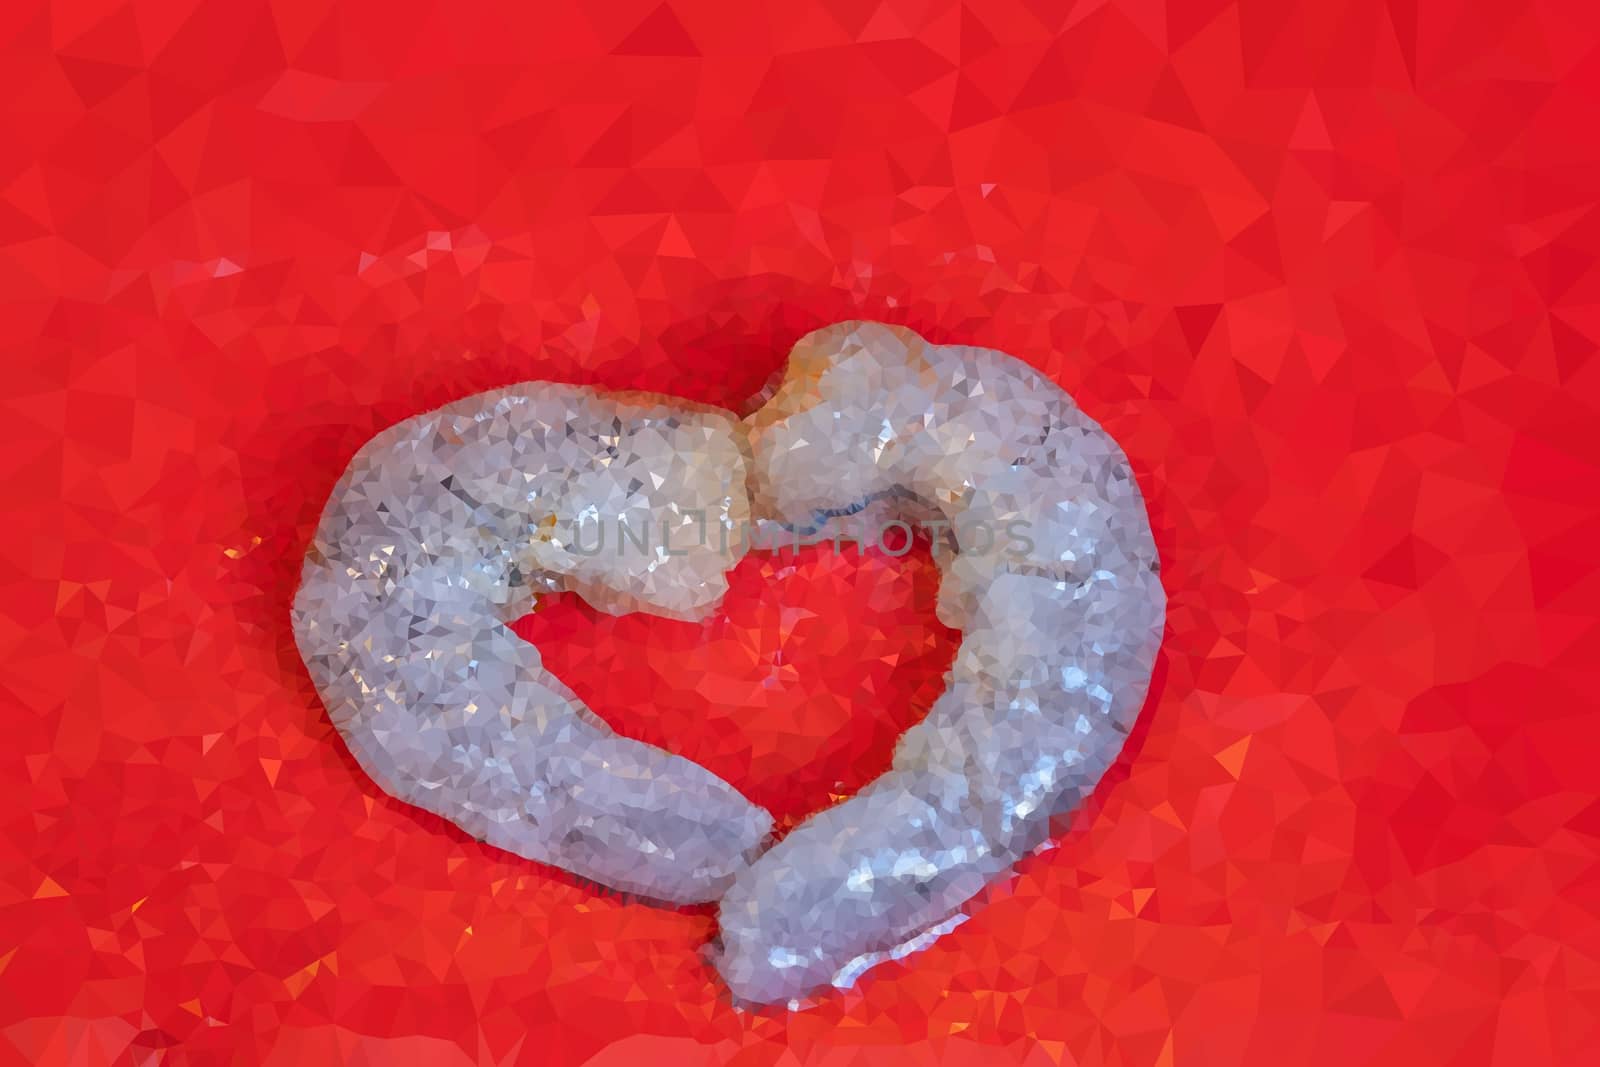 The Abstract Triangles of Two prawns in heart shape, valentine food concept